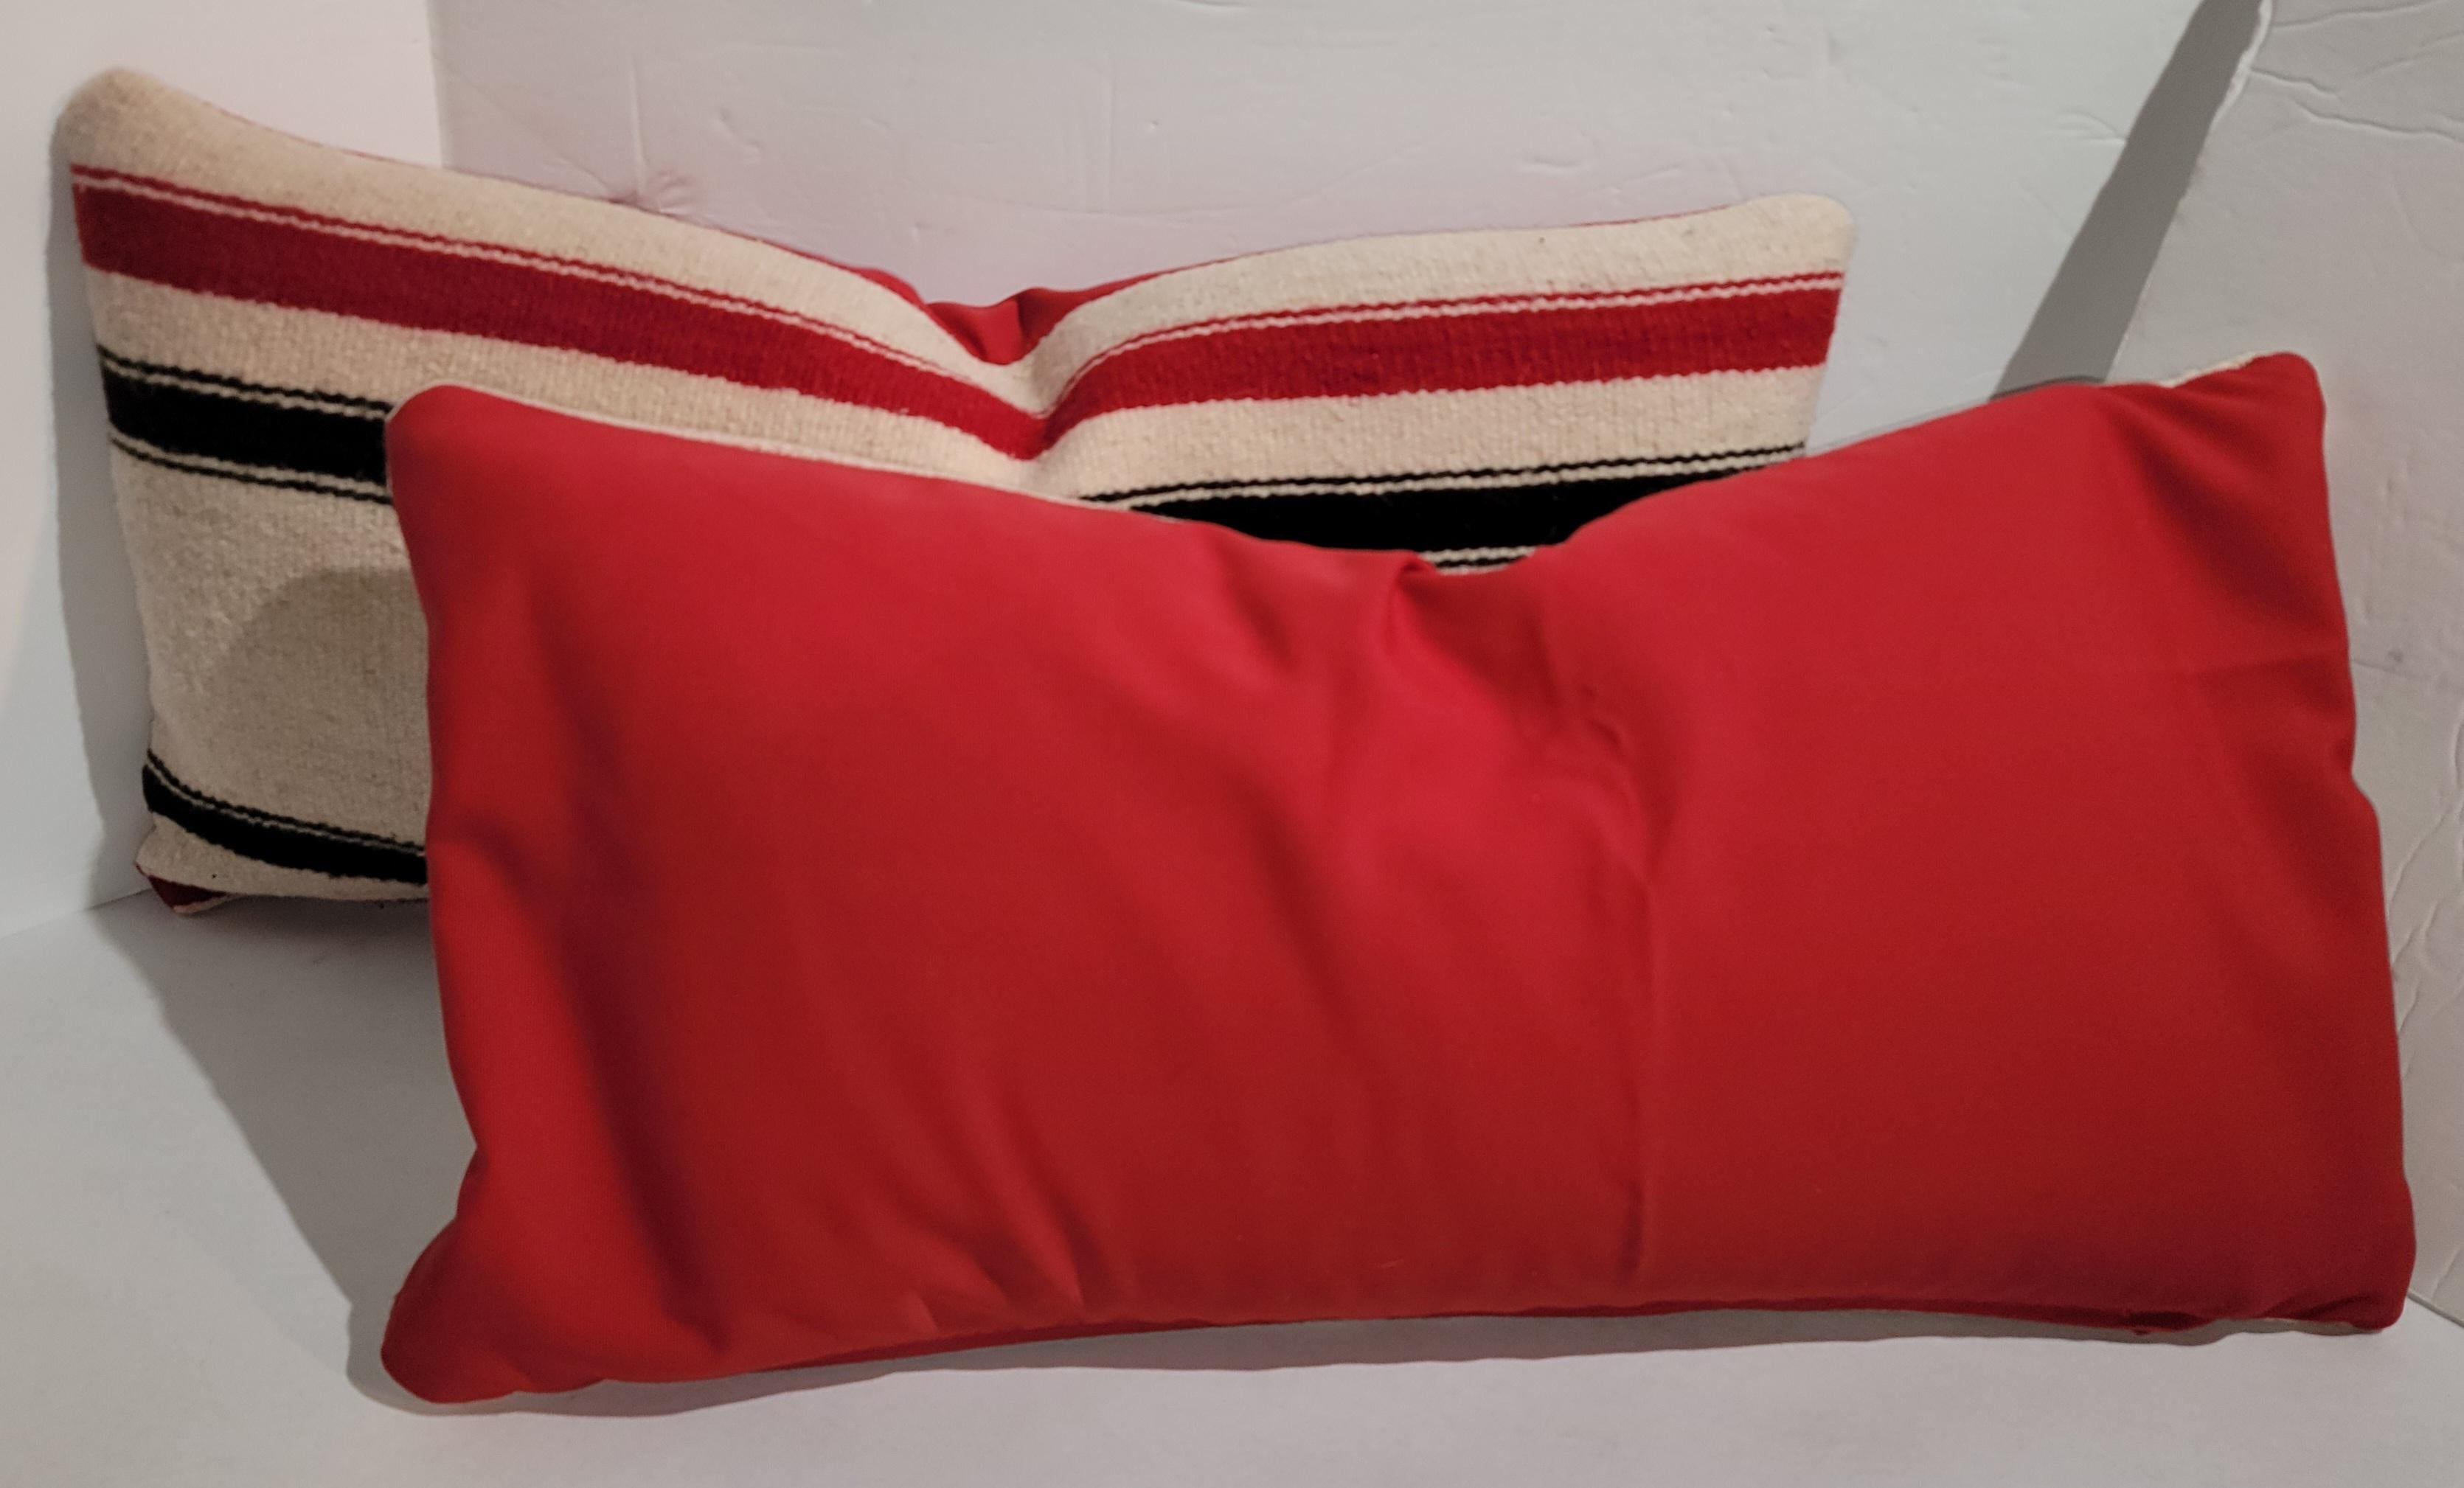 Adirondack Red And Black Stripe Saddle Blanket Pillows For Sale